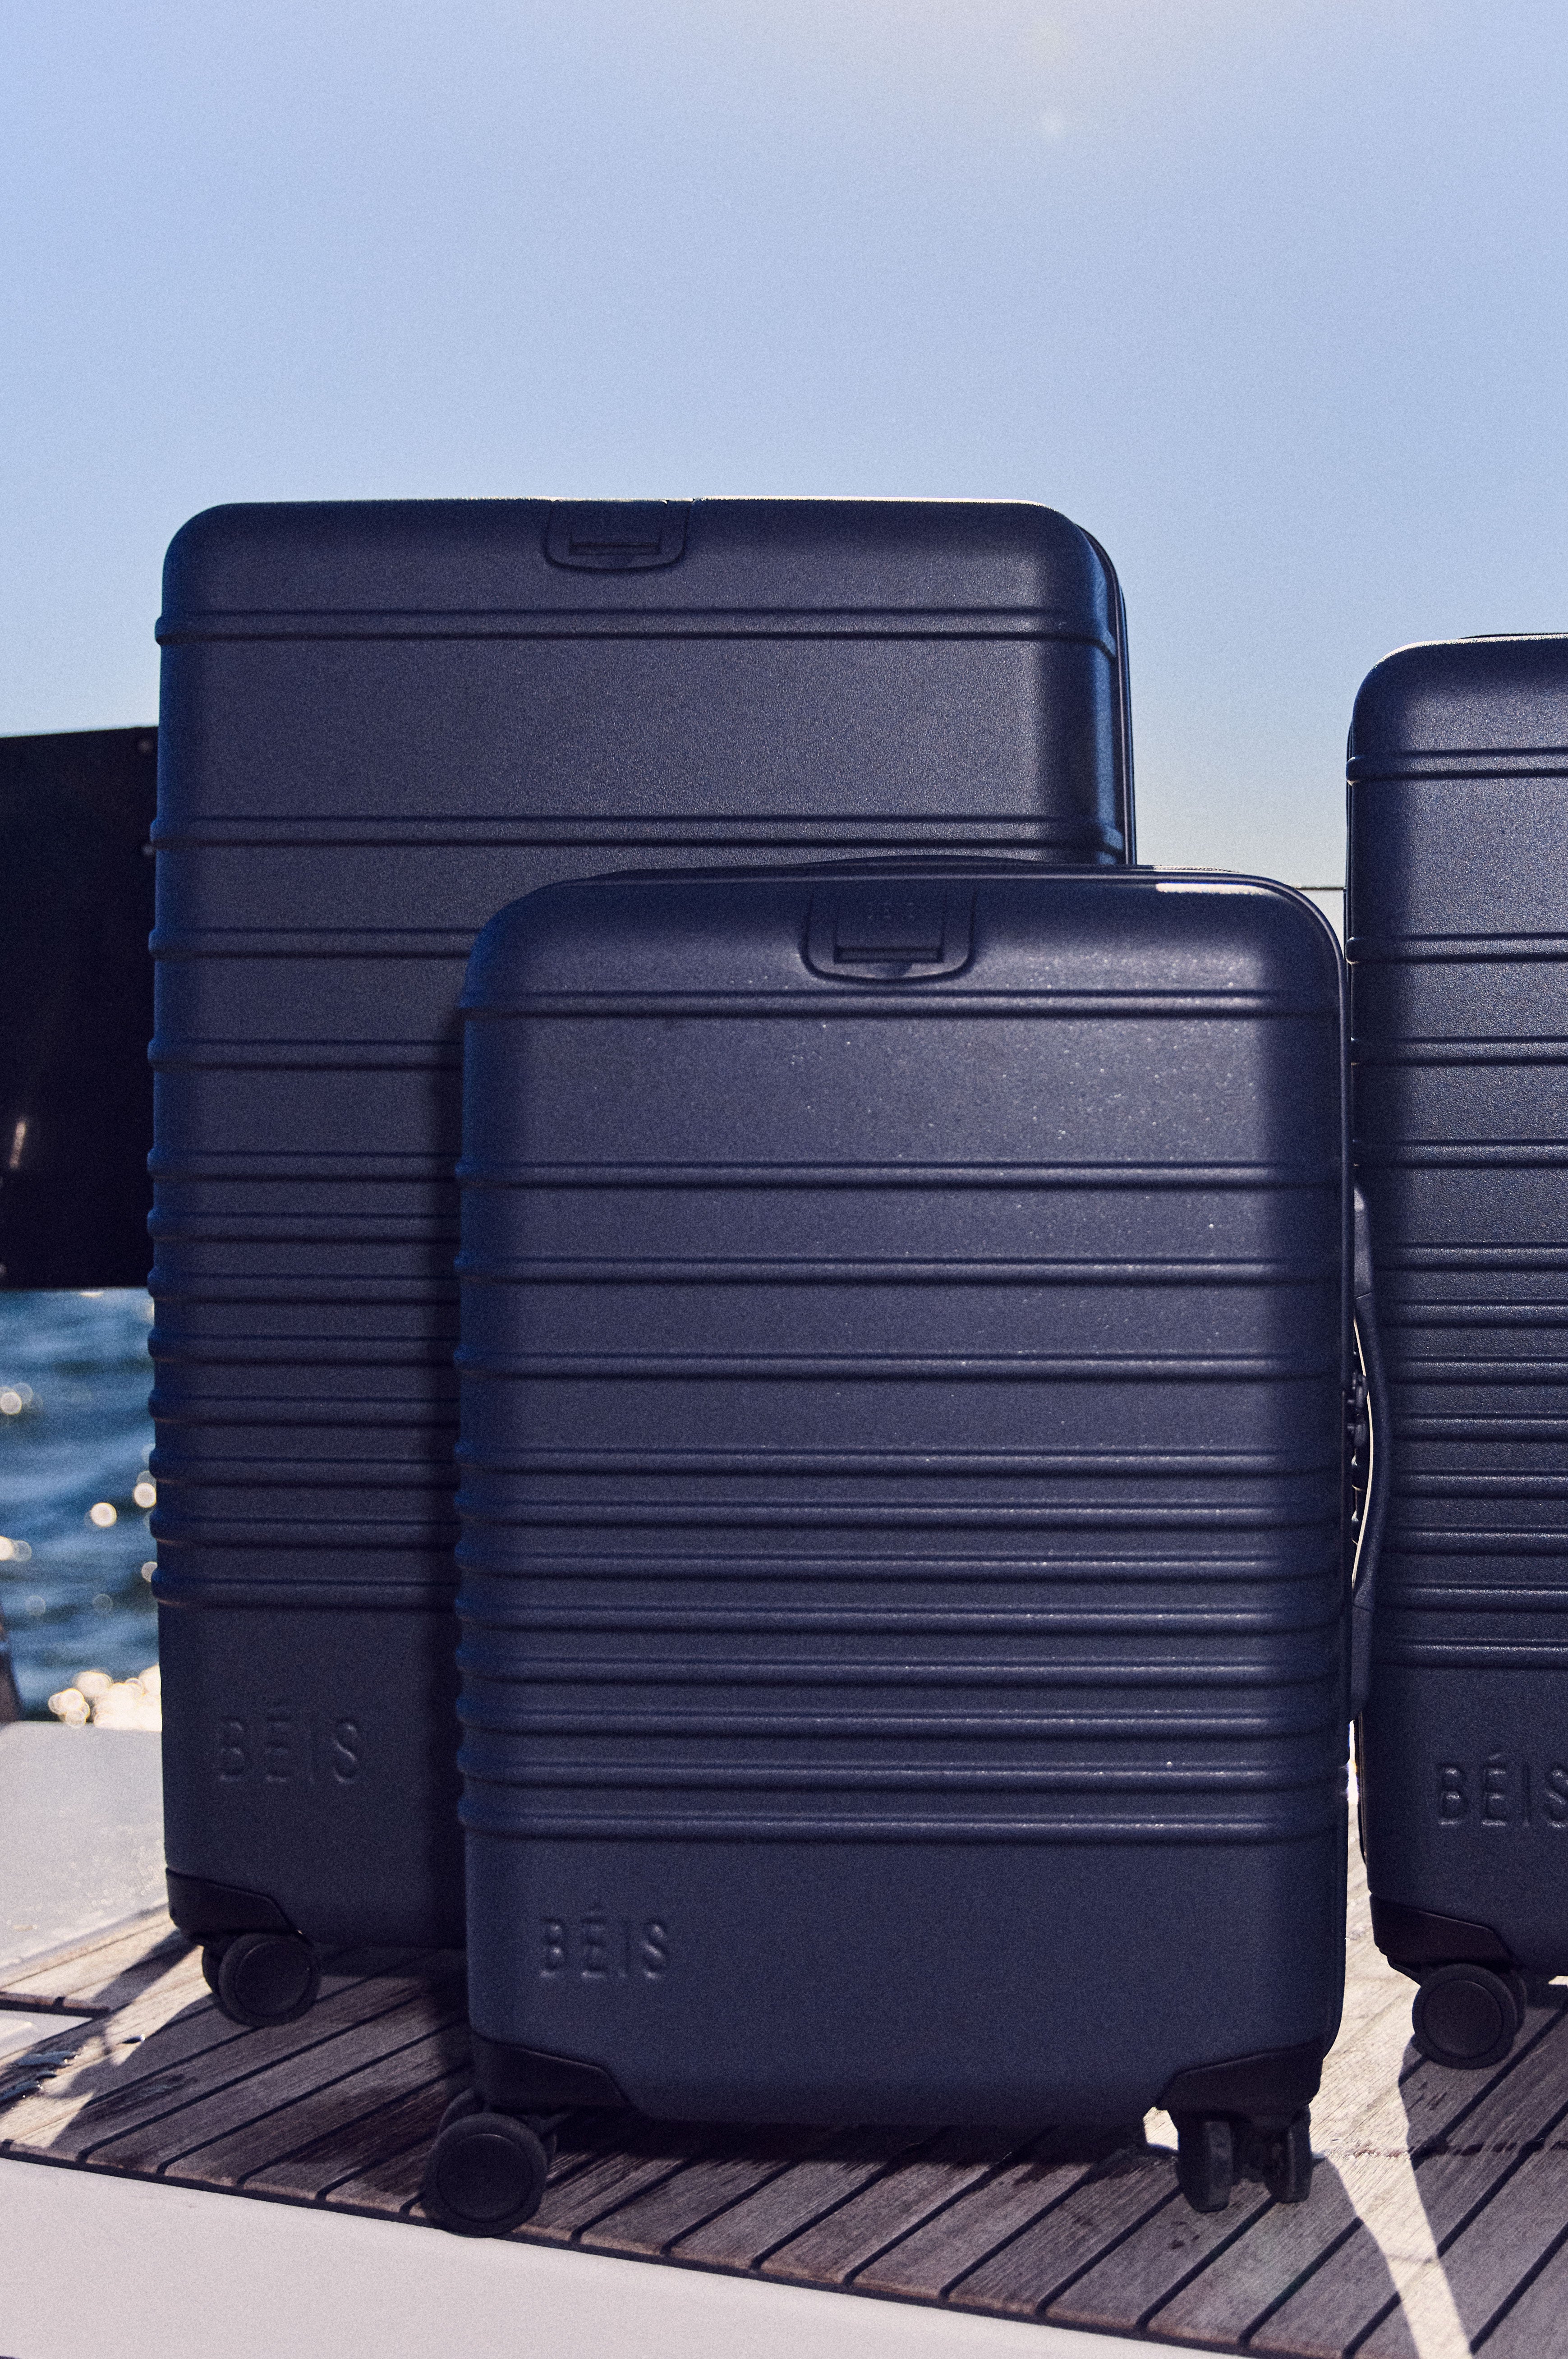 BÉIS 'The Carry-On Roller' in Navy - Blue Suitcase & 21